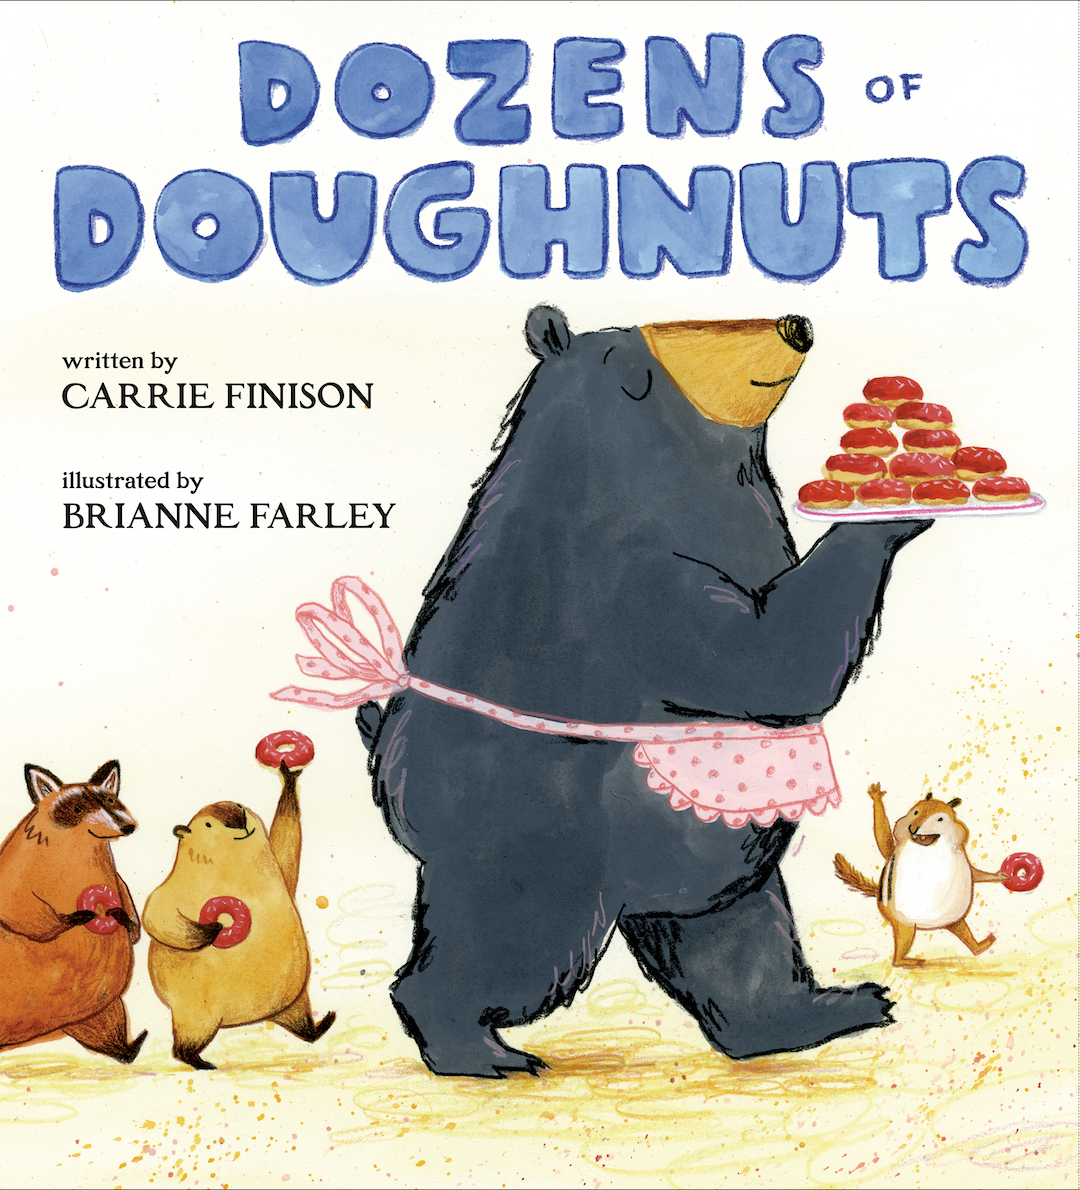 Cover of the picture book Dozens of Doughnuts with a large bear carrying a platter of doughnuts and smaller woodland animals following her, also eating doughnuts